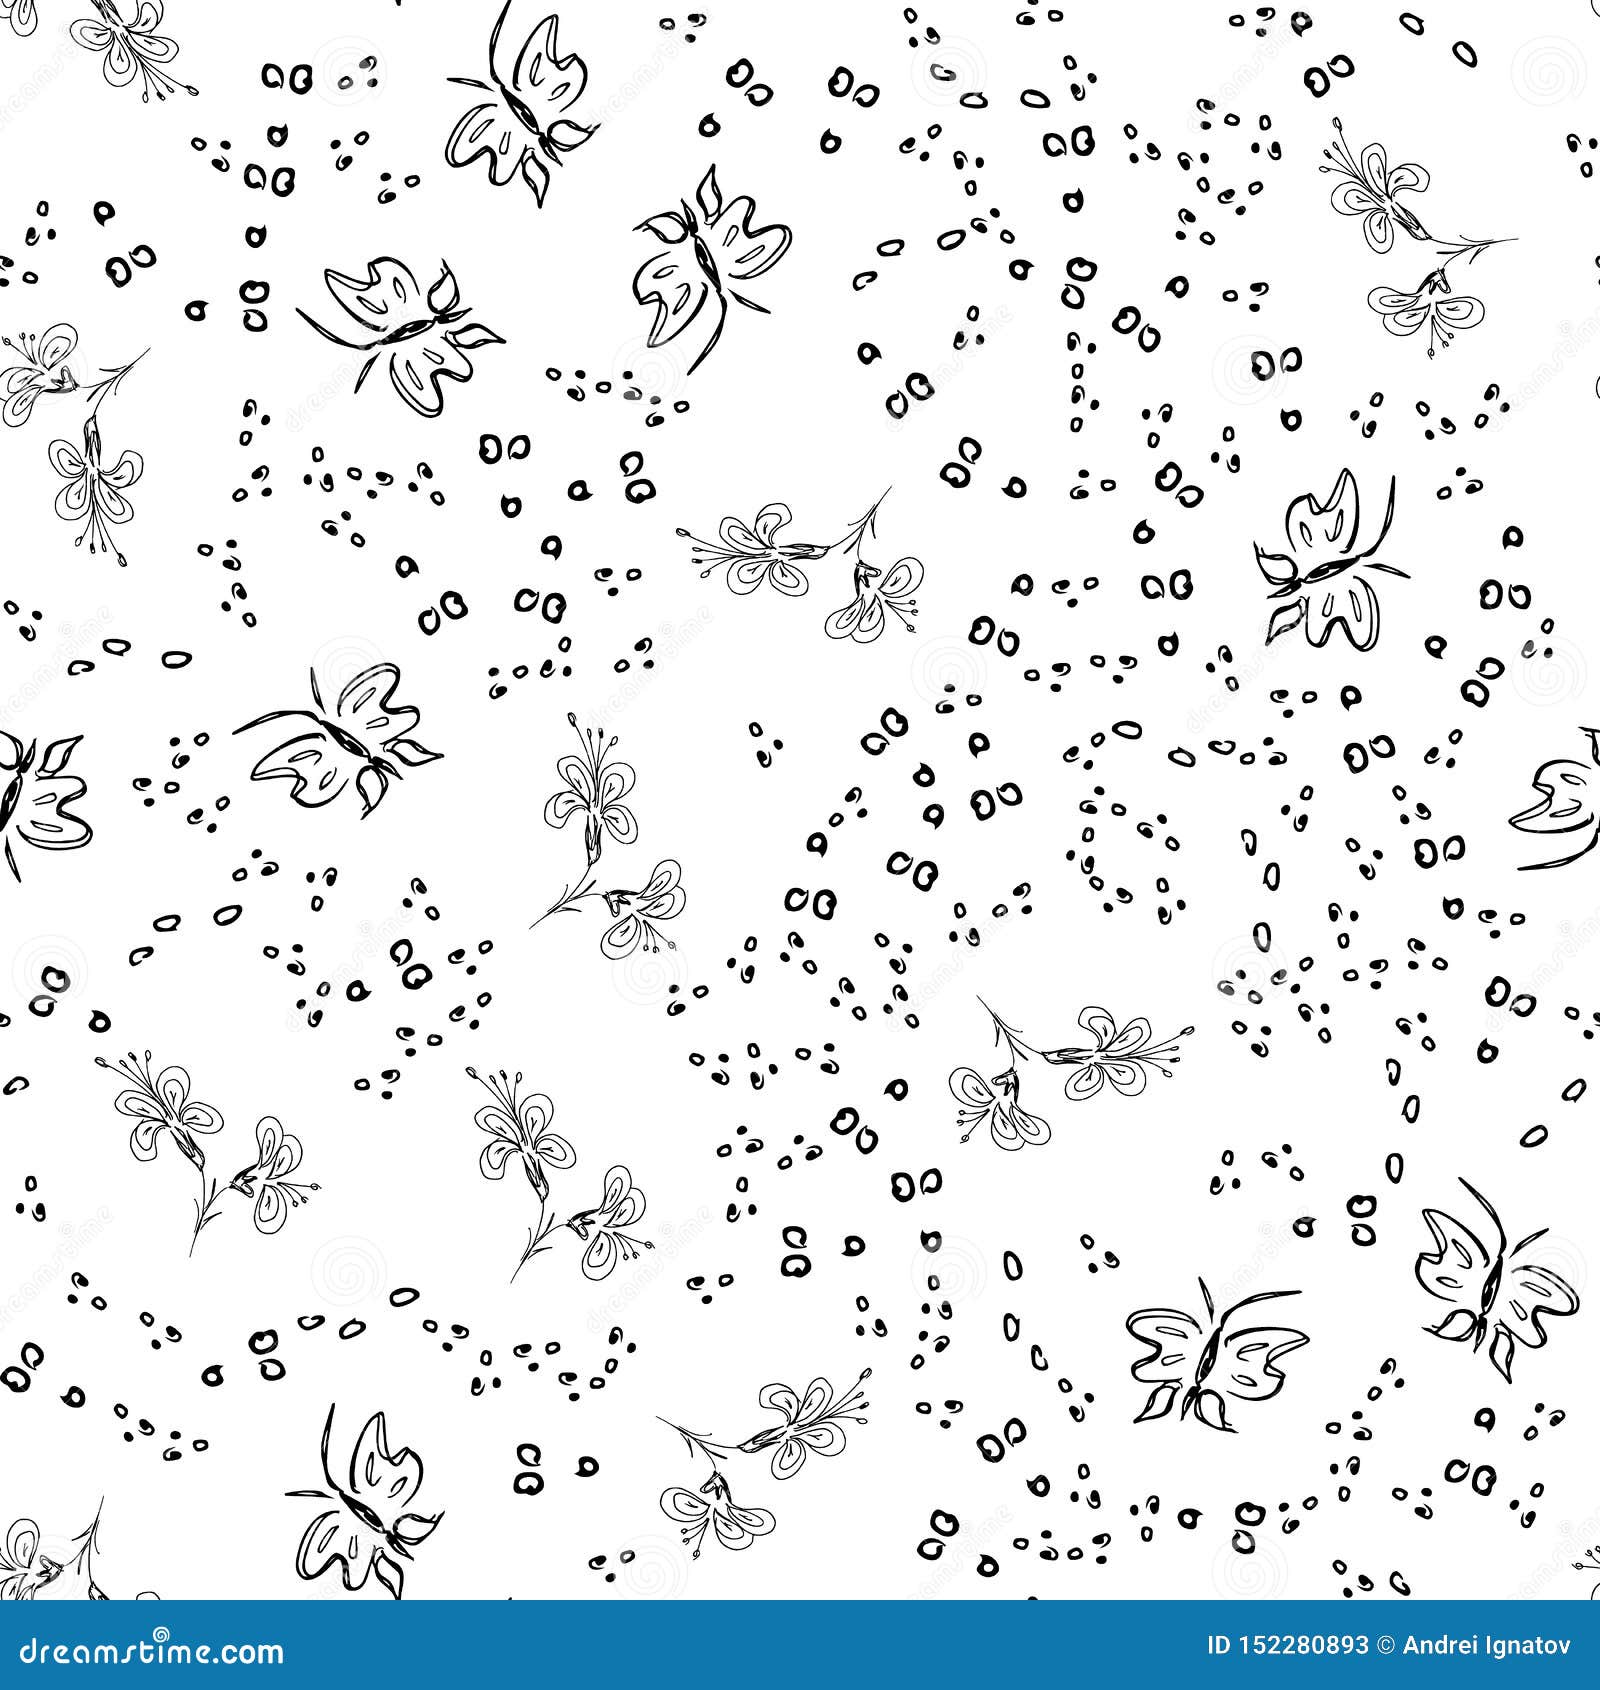 Butterfly Seamless Outline Vector in Line Art Style on White Background.  Line Art Butterfly. Cartoon Animals, Flowers and Dots Stock Illustration -  Illustration of wallpaper, vintage: 152280893